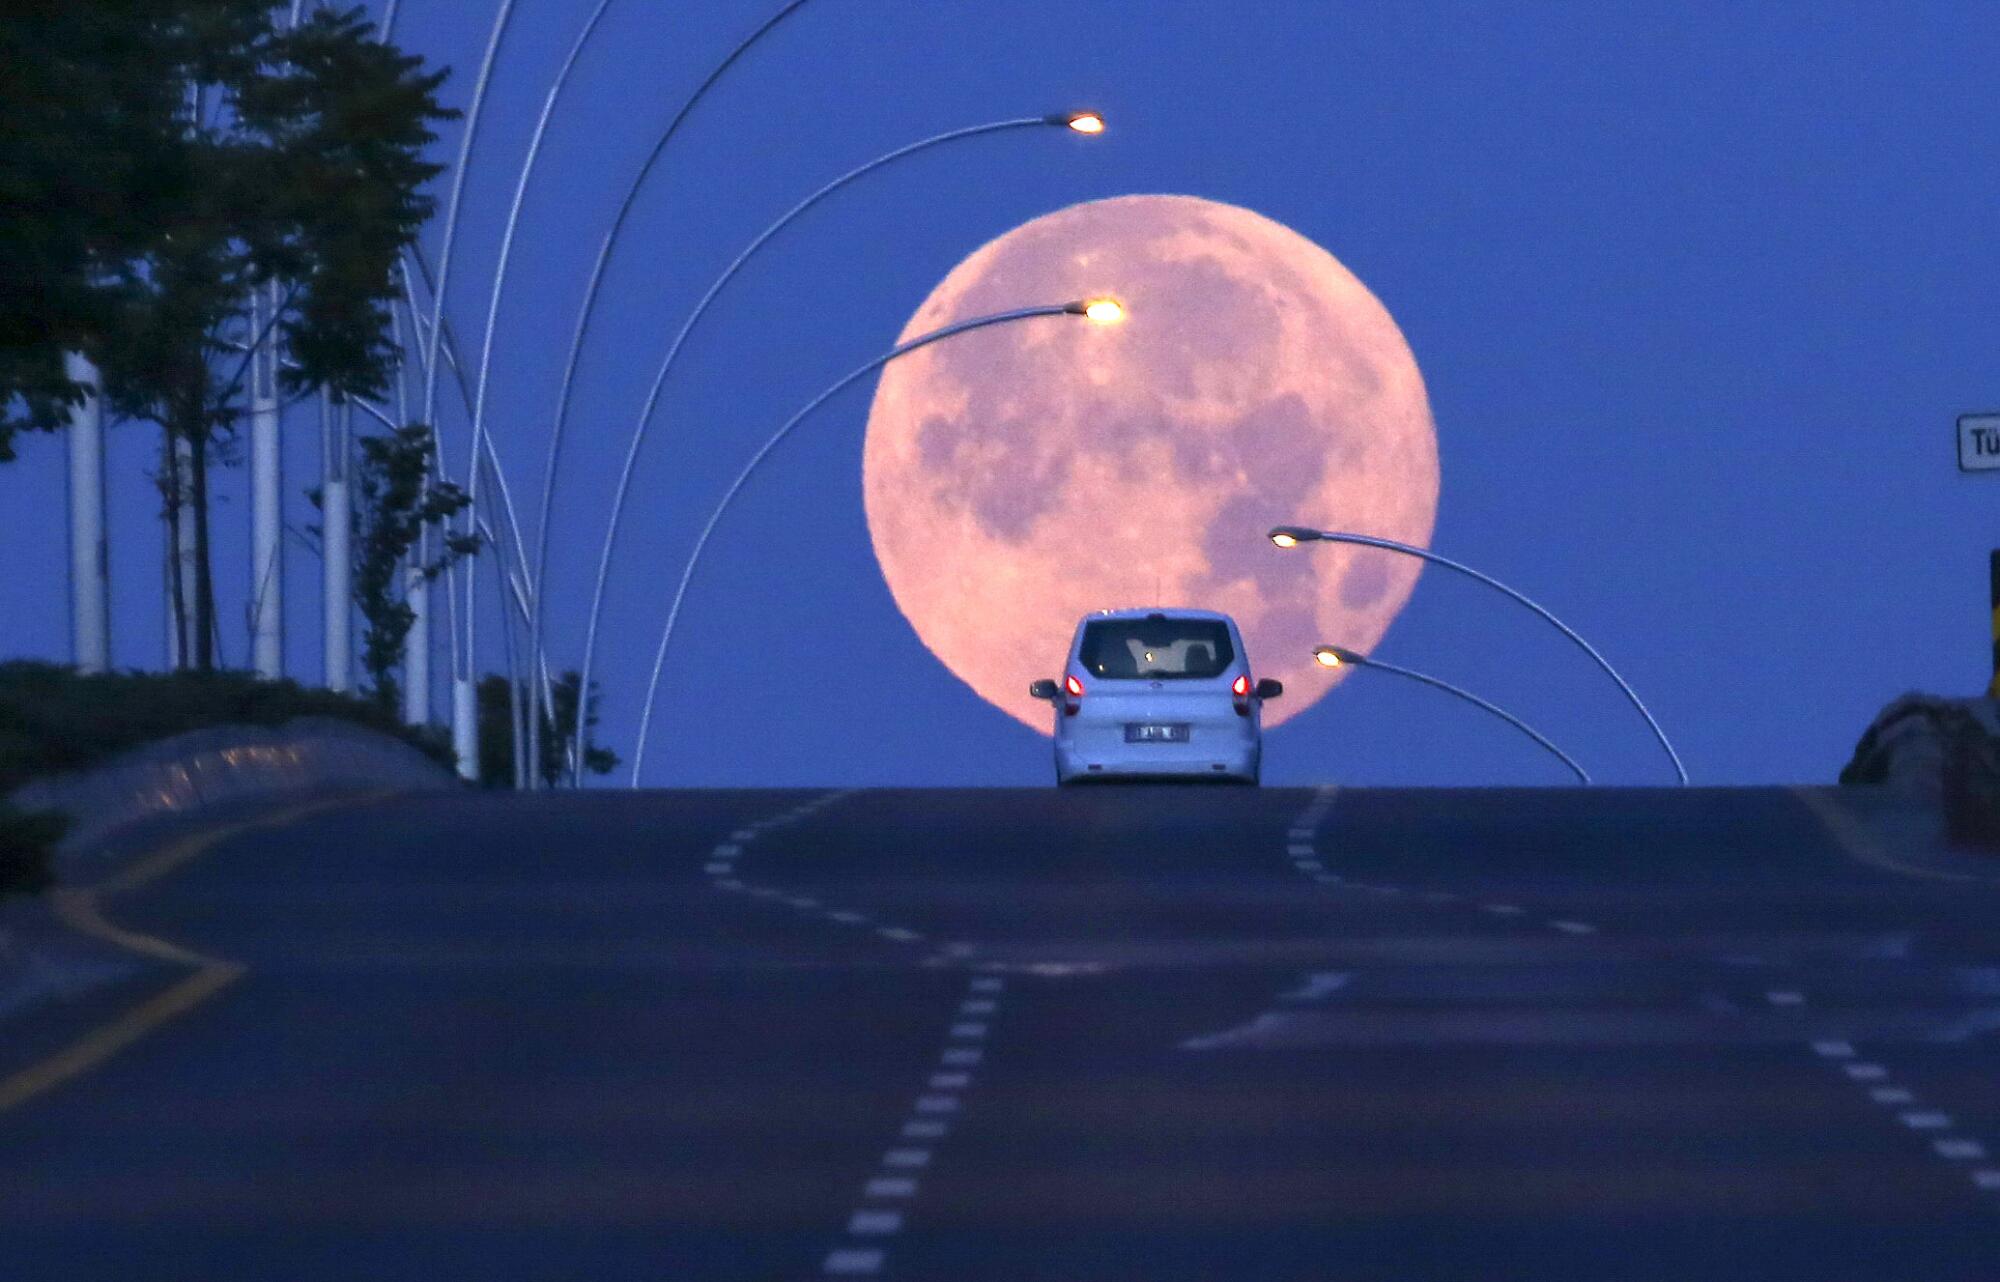 A vehicle in Ankara, Turkey, is silhouetted against the rising moon